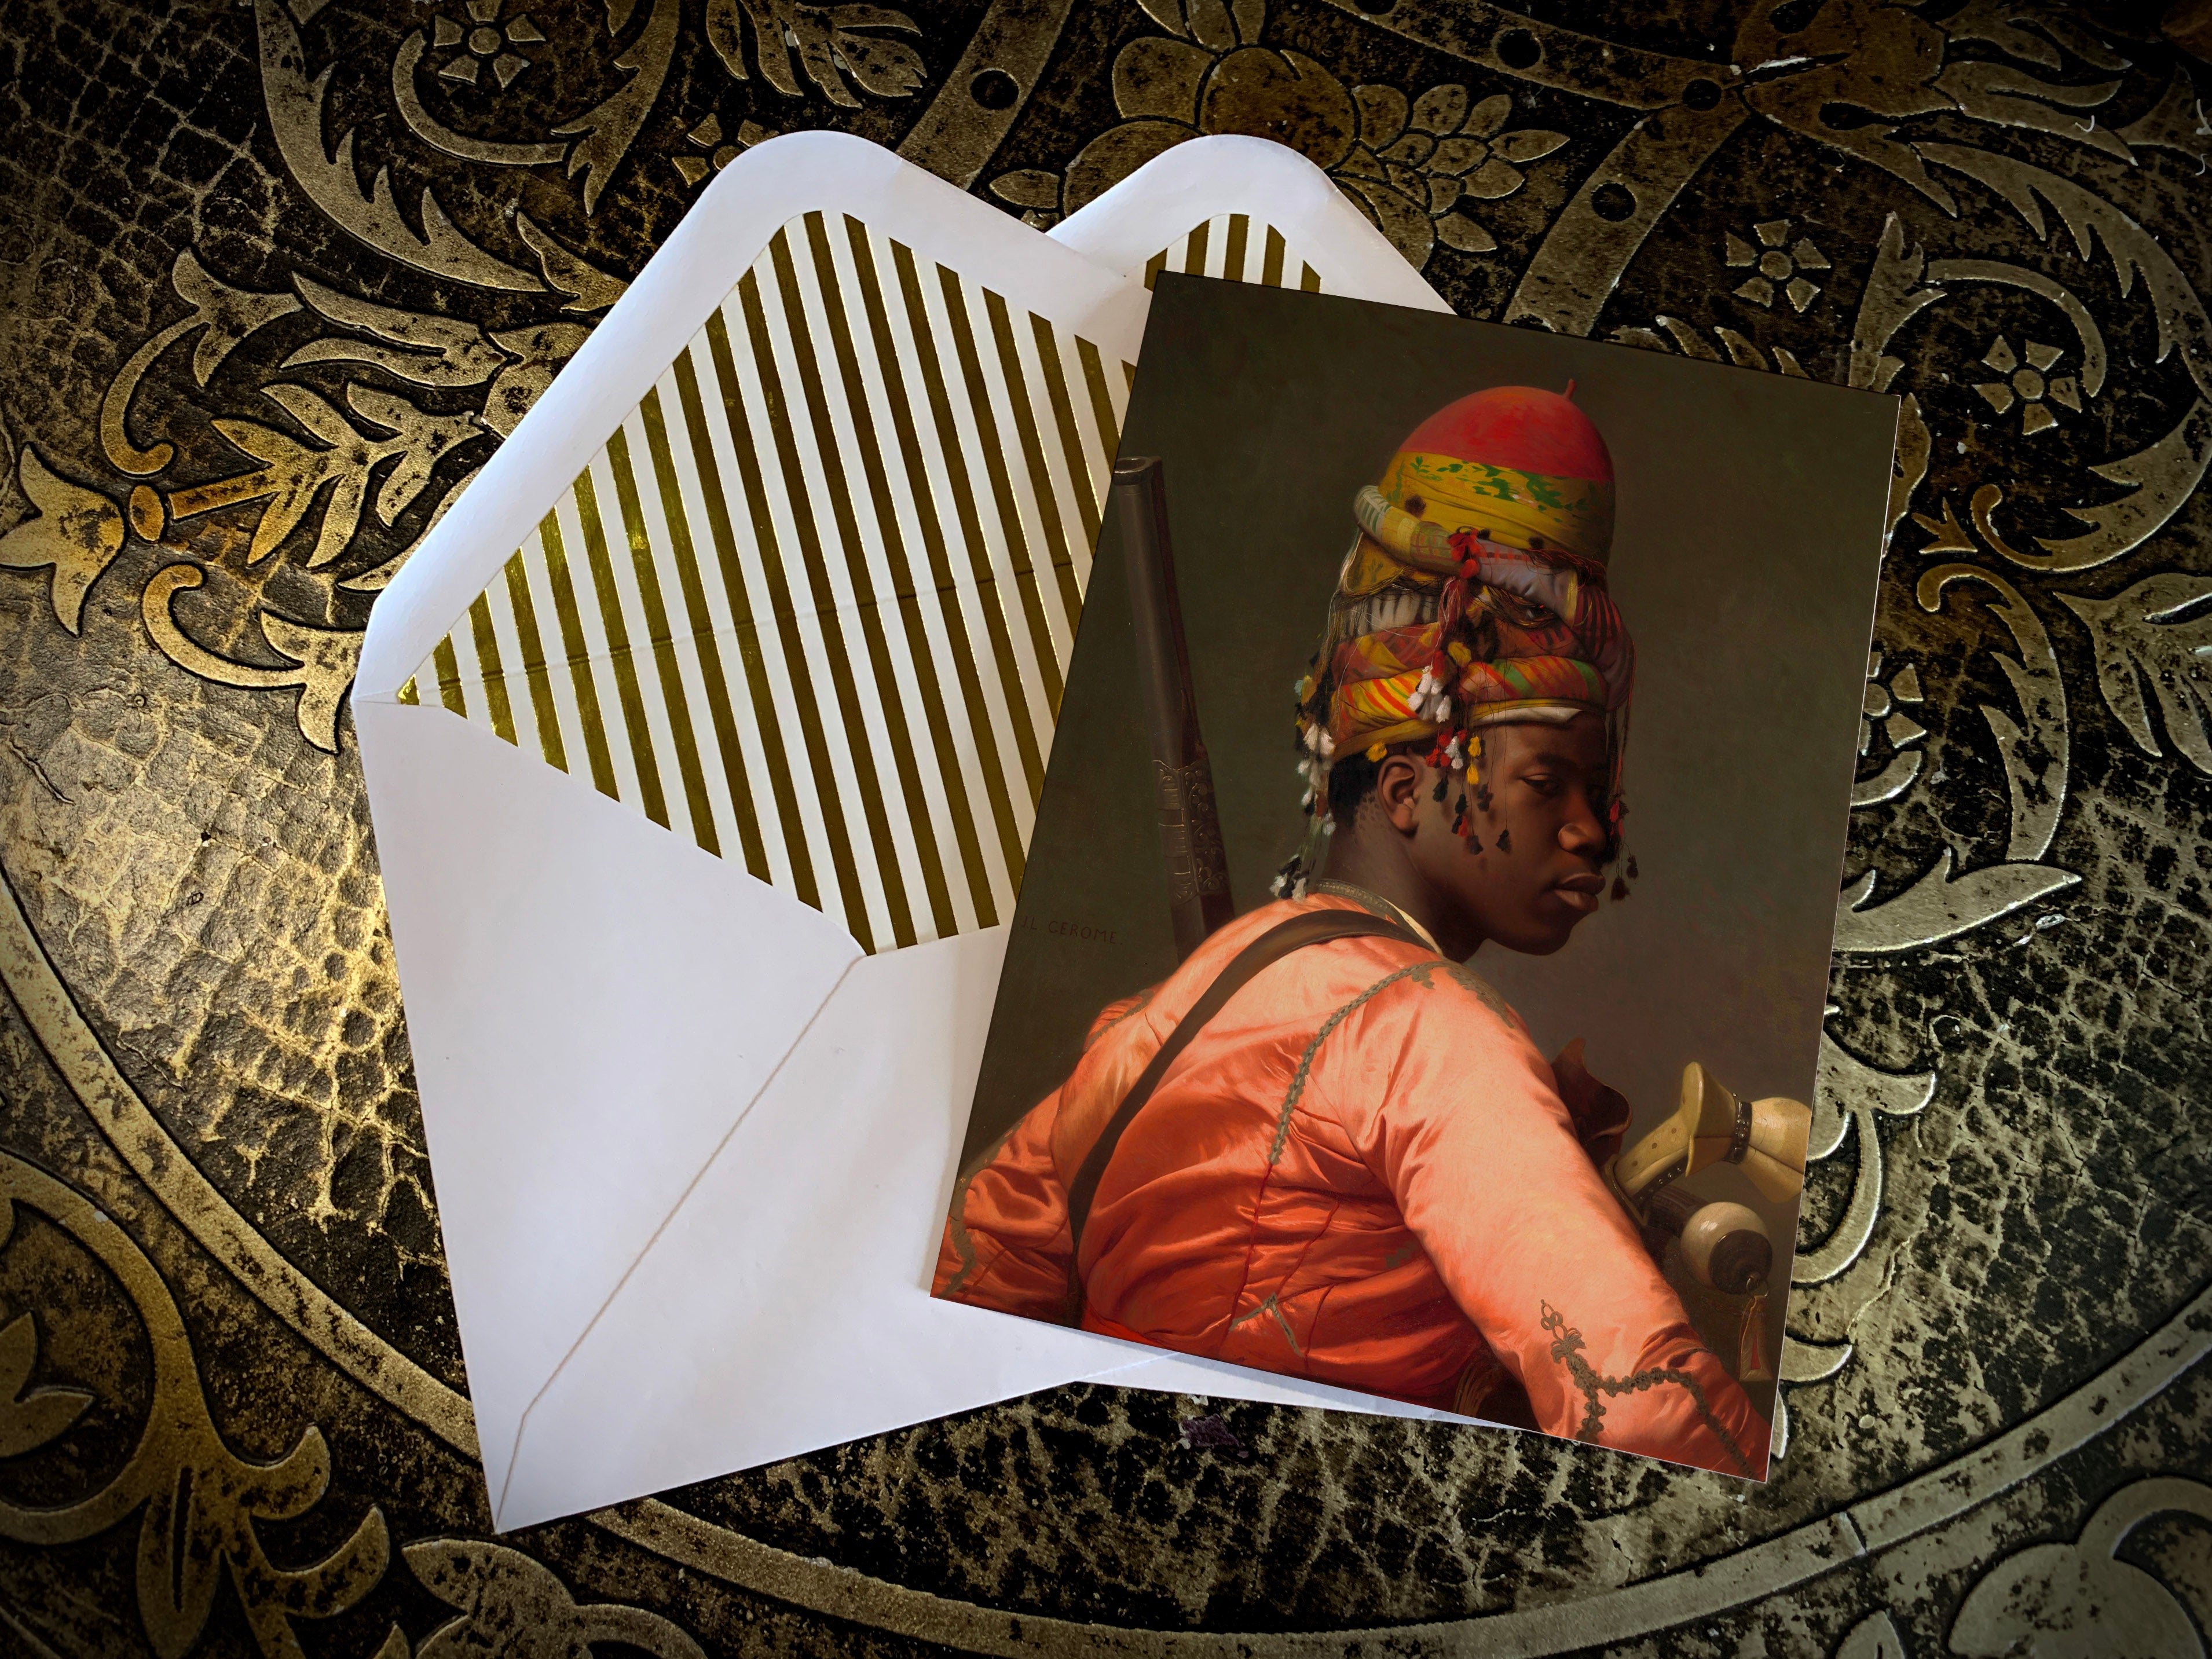 Bashi Bazouk African Warrior by Jean-Léon Gérôme, Greeting Card with Elegant Striped Gold Foil Envelope, 5in x 7in, 1 Card/Envelope